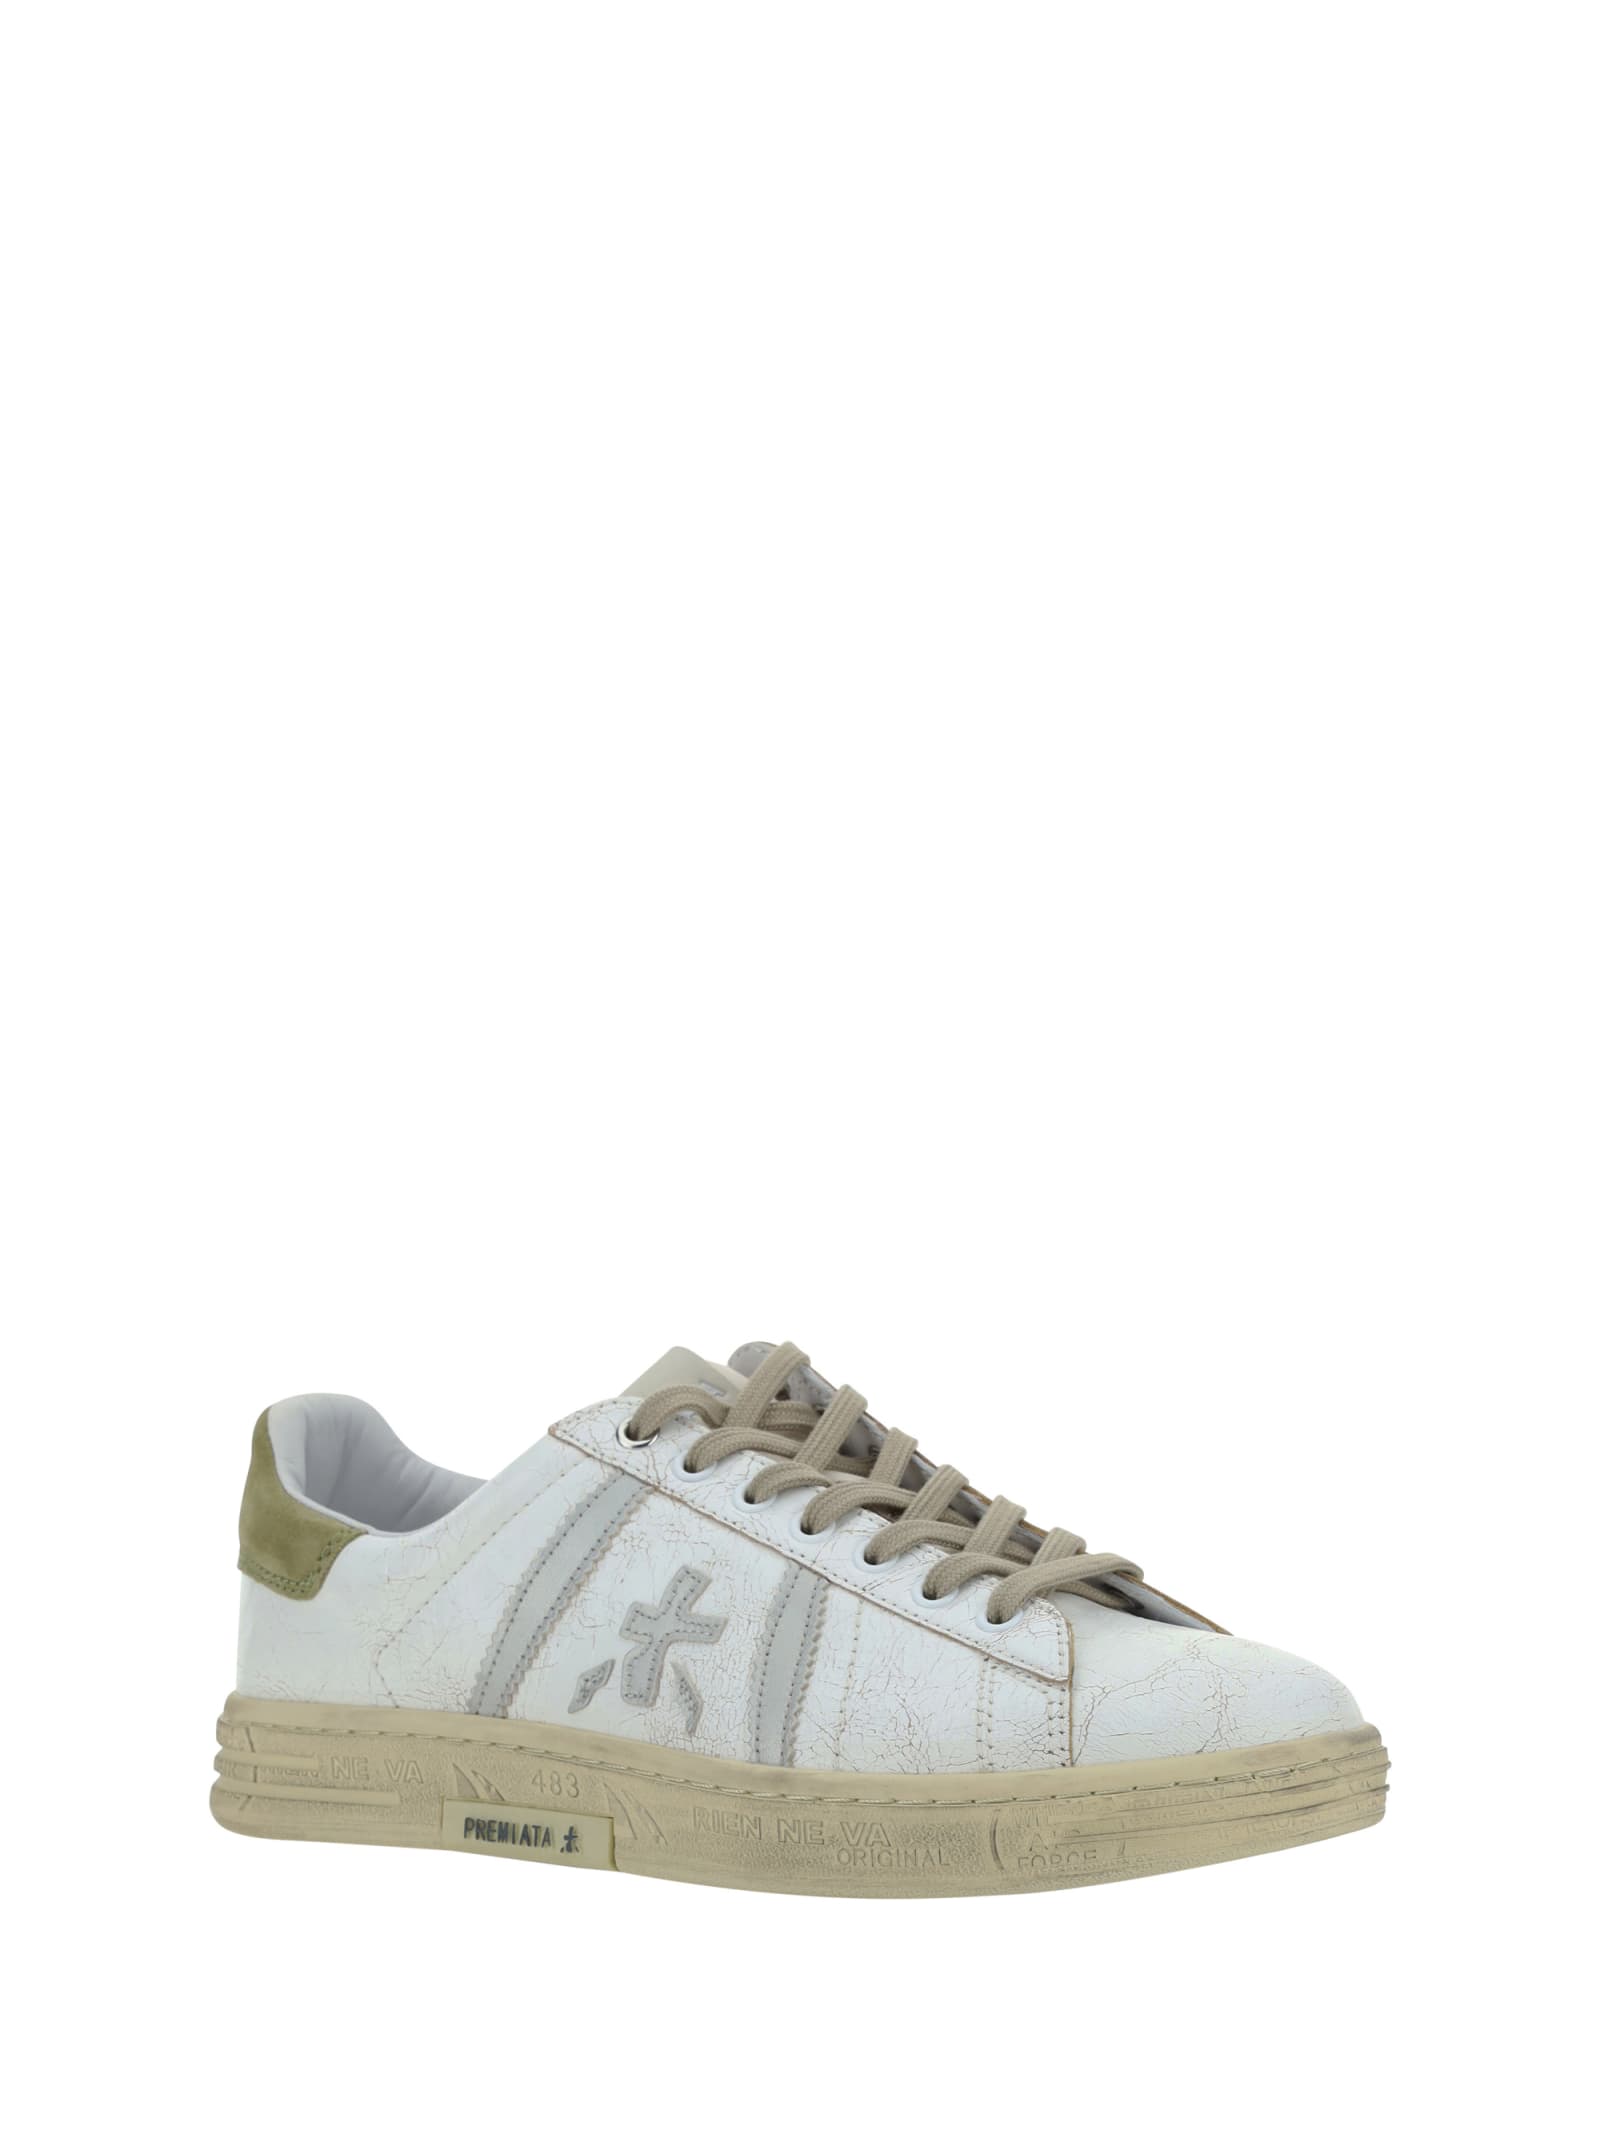 Shop Premiata Russell Sneakers In White